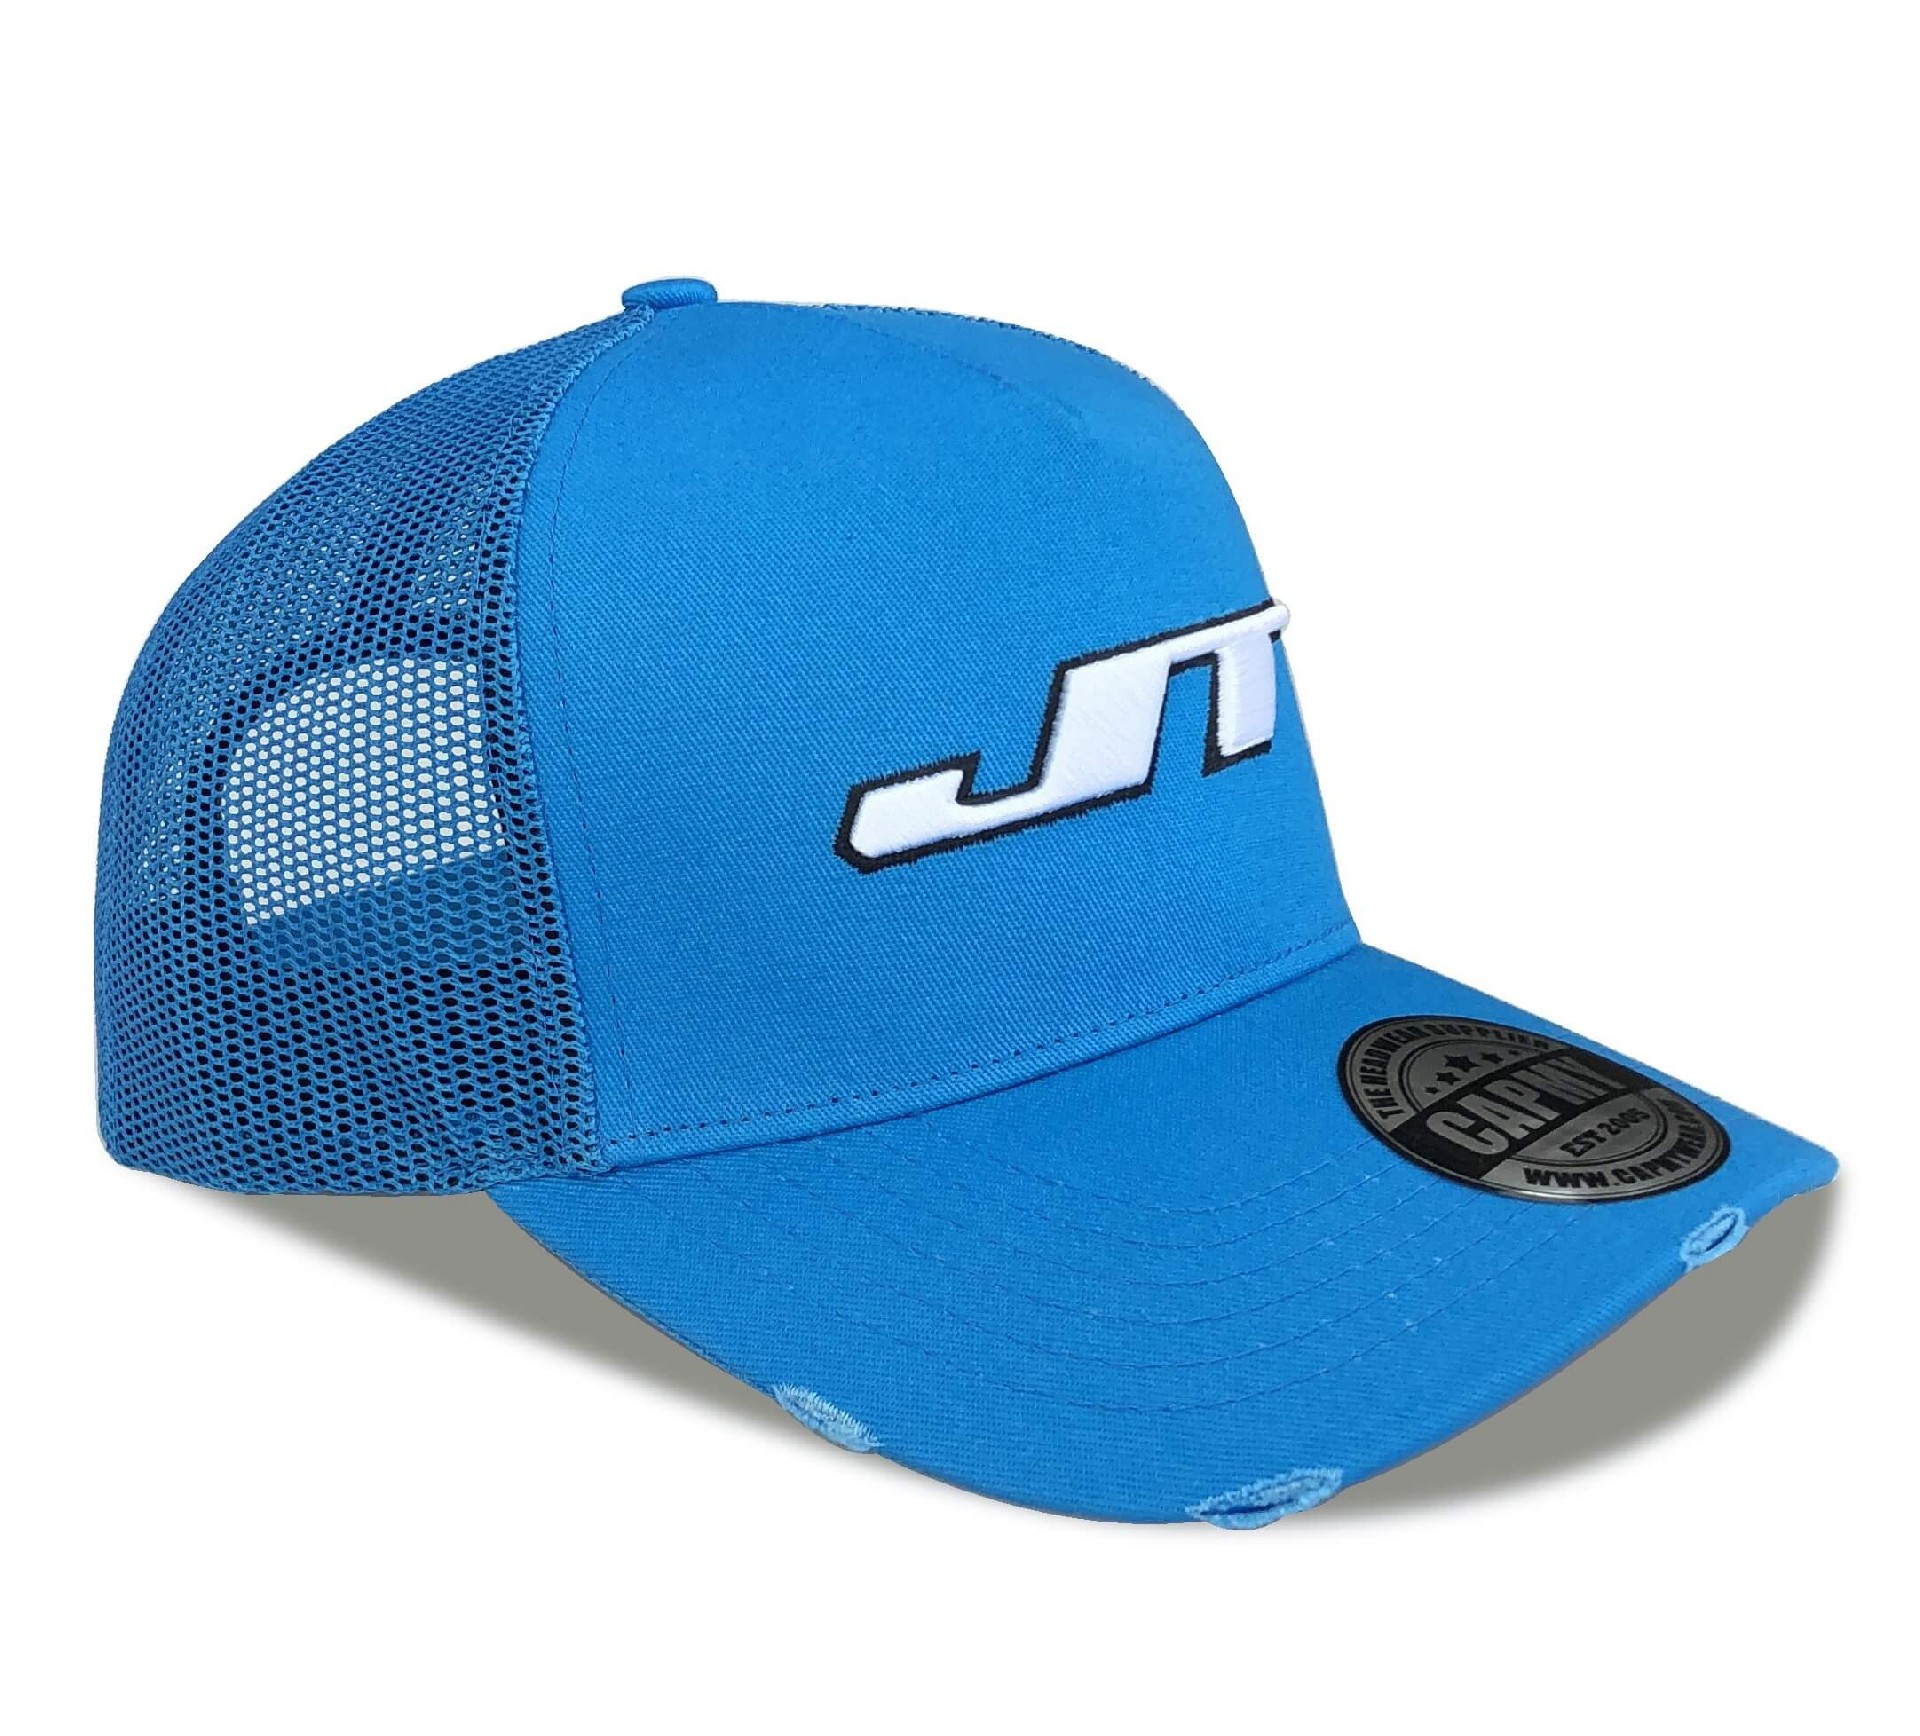 CMC-3137(High Quality 5 Panel Yelir Structured Mesh Distressed Vintage Rip Blue Trucker Hat Factory)